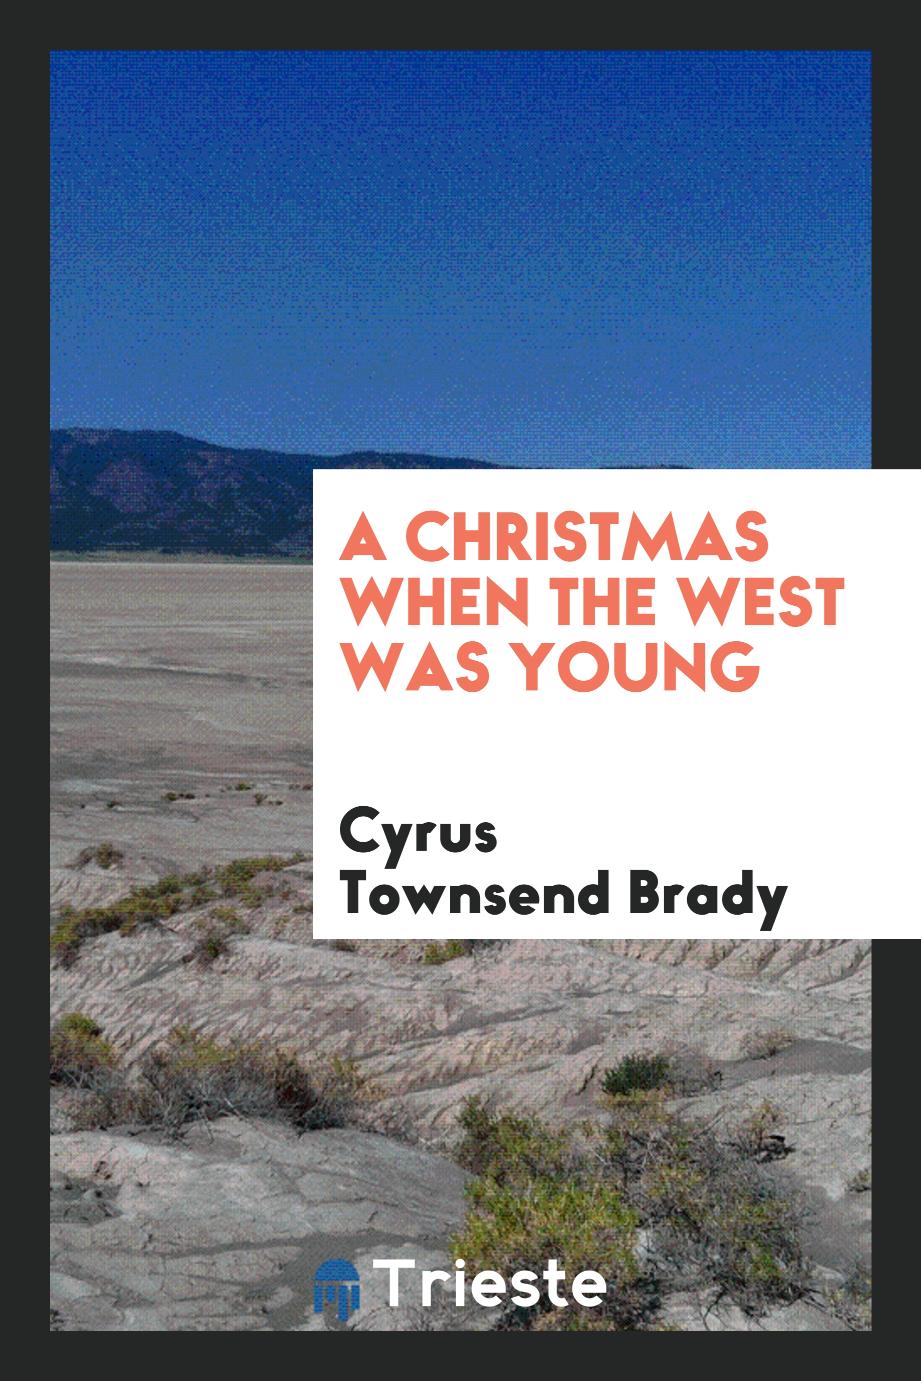 A Christmas when the West was Young